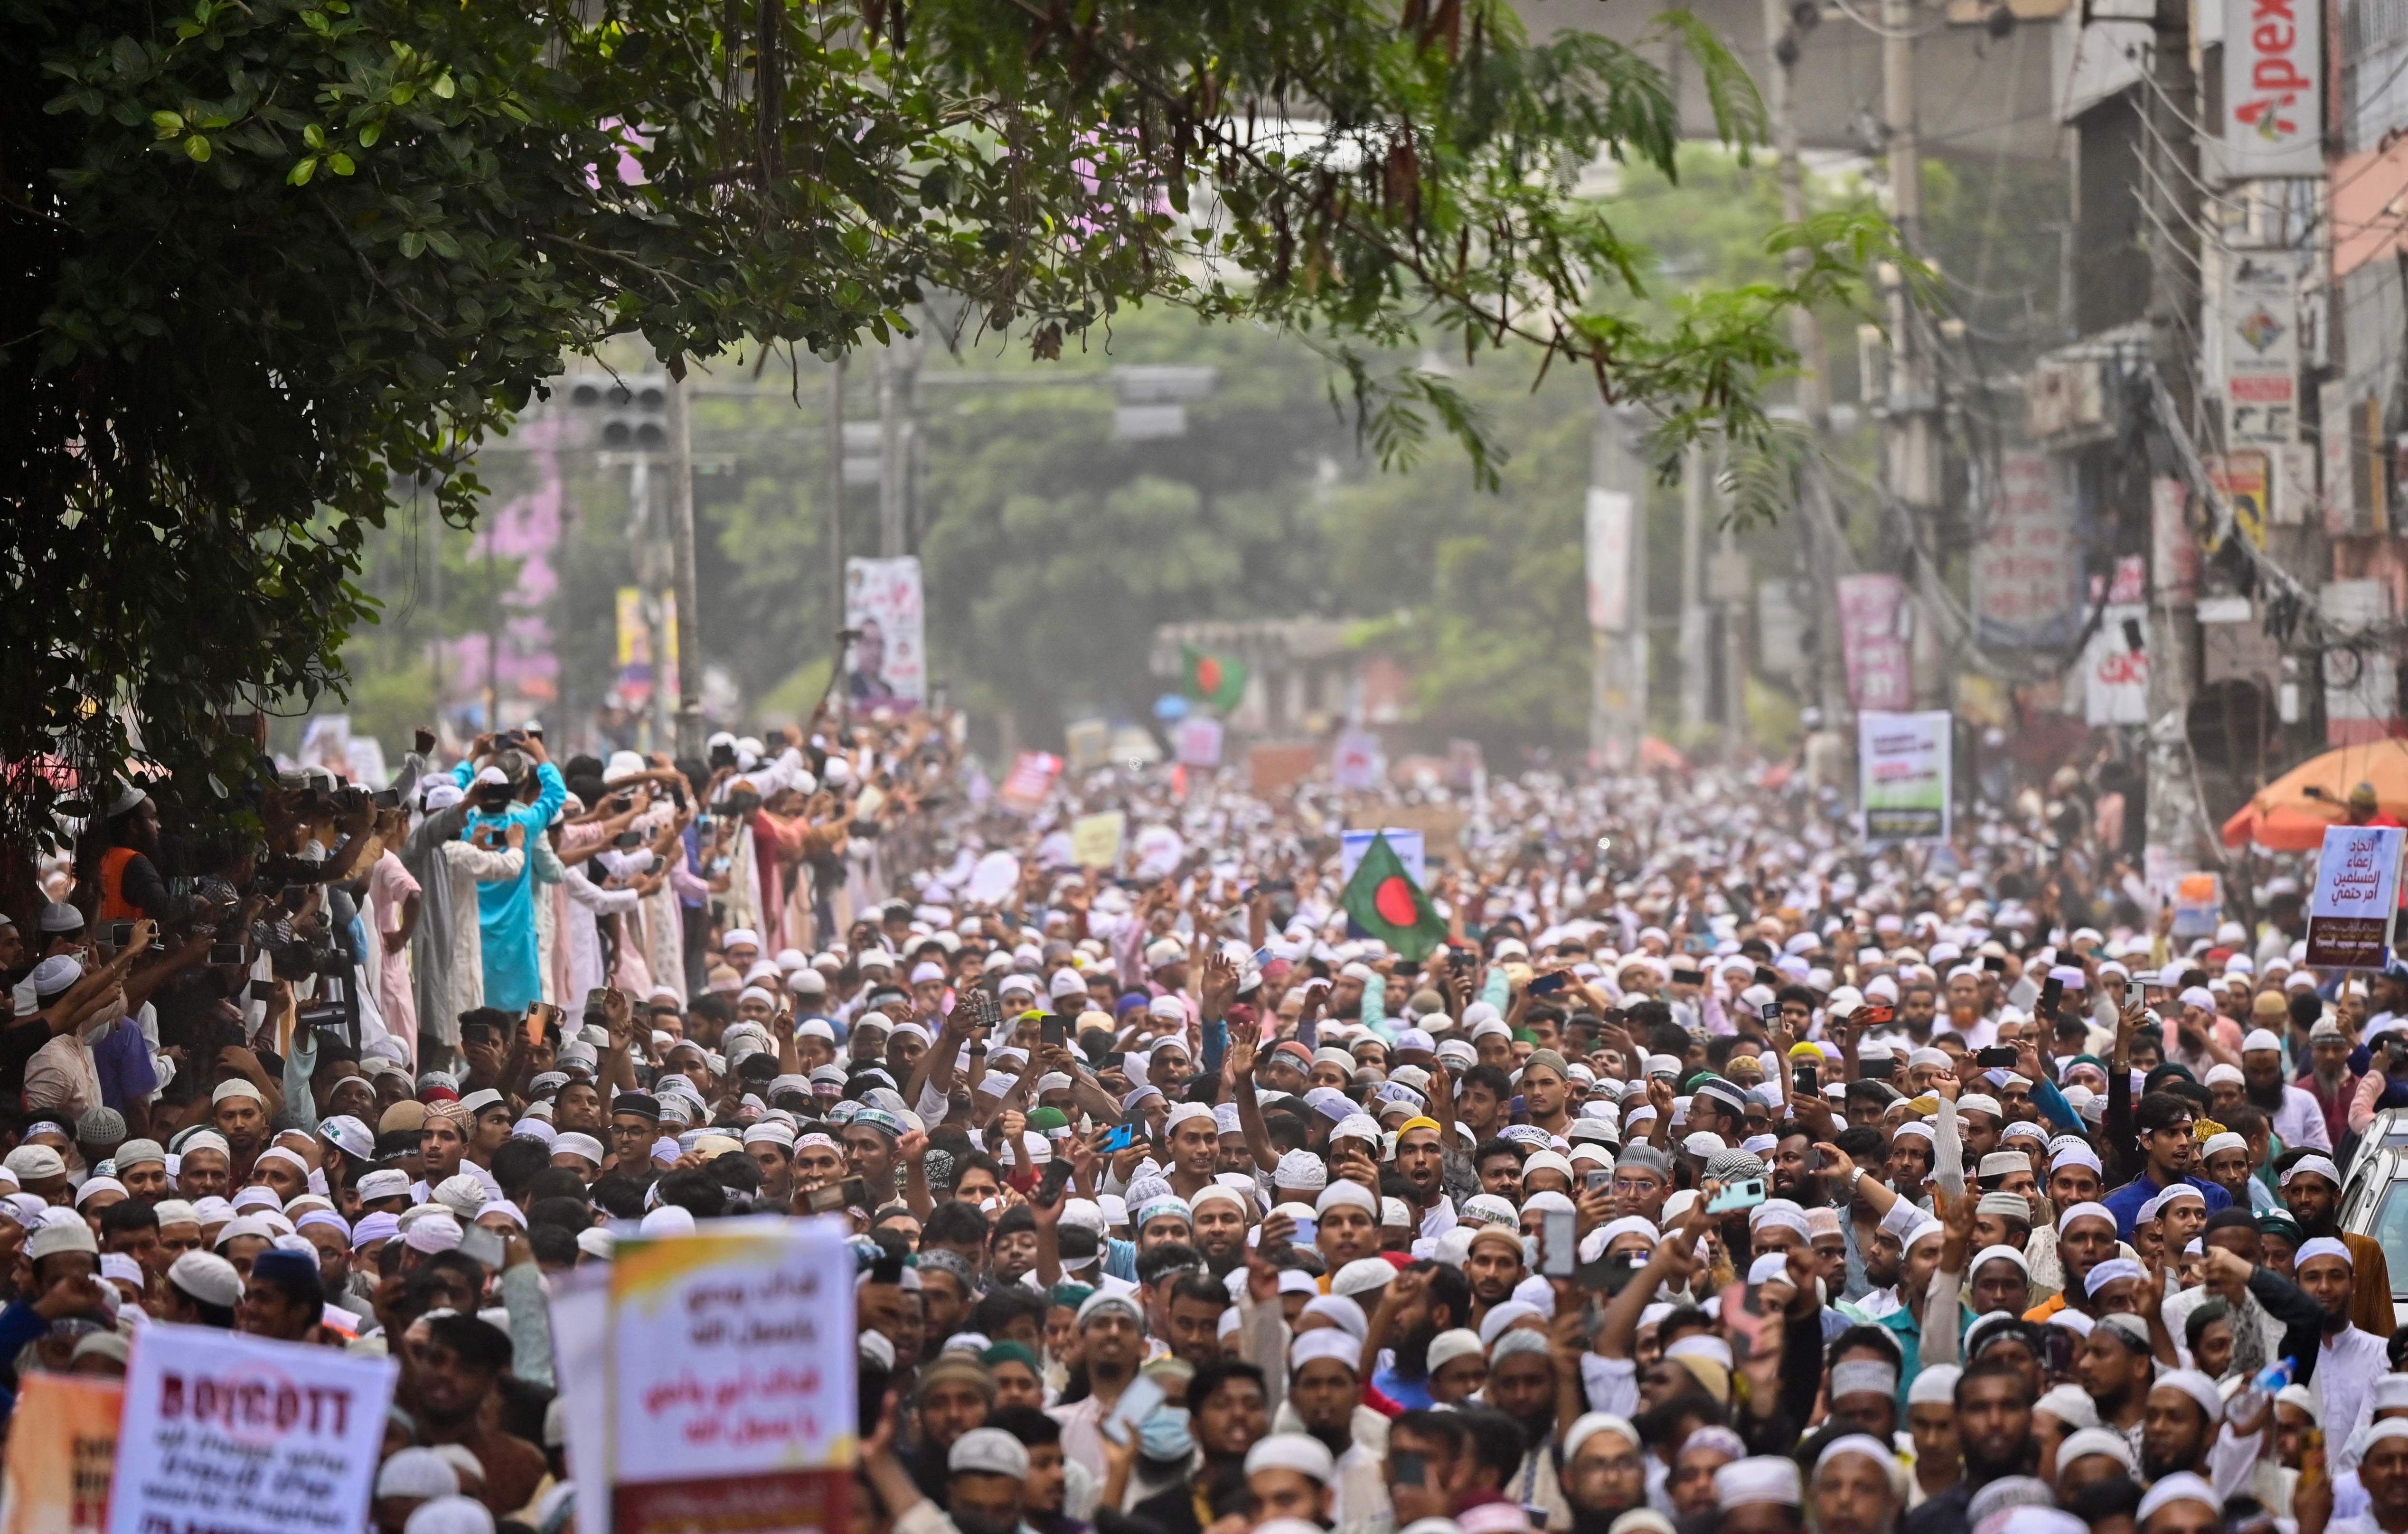 Bangladesh’s Islamist parties’ activists and supporters hold placards and shout anti-India slogans during a demonstration in Dhaka on 10 June to protest former BJP spokeswoman Nupur Sharma over her incendiary remarks about prophet Muhammad